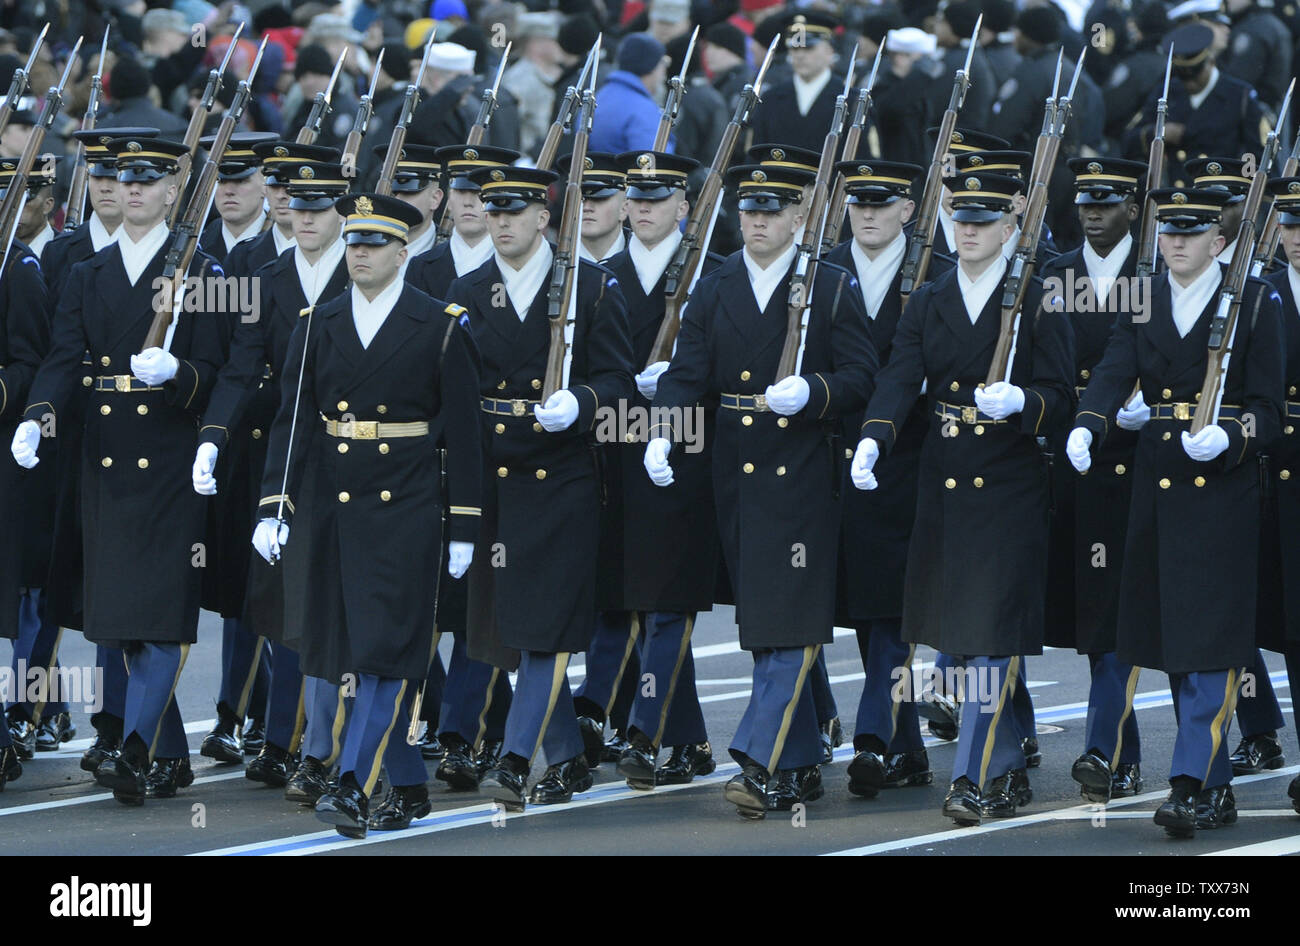 Members of the United States Army Honor Guard march in U.S. President Barack Obama's Inaugural Parade in Washington, D.C. on January 21, 2013. President Obama was sworn-in for a second term as the 44th President of the United States. UPI/Kevin Dietsch Stock Photo